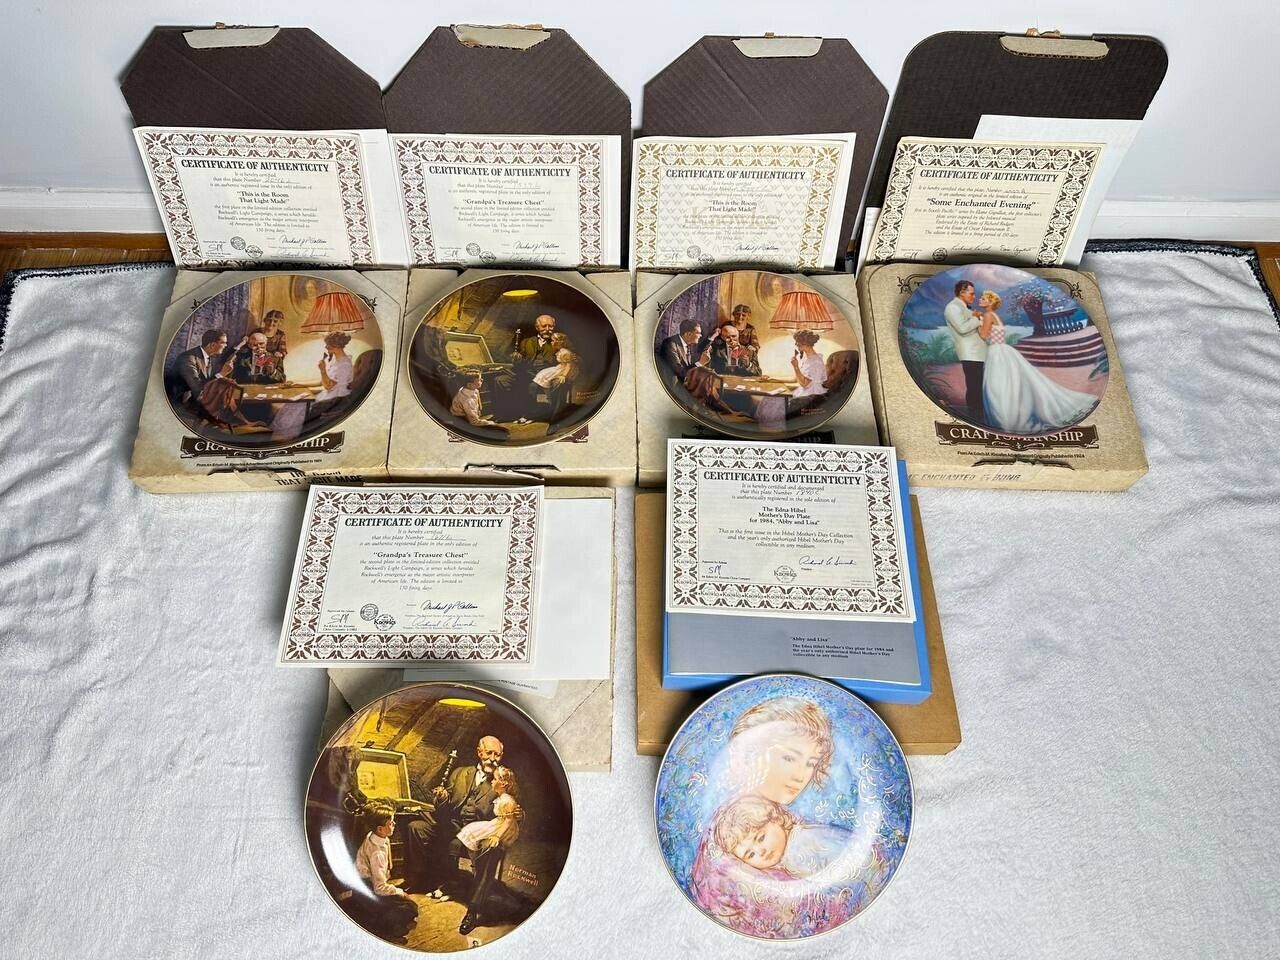 Lot of 6 Knowles by Norman Rockwell Plates / Mother's Days with Certificate